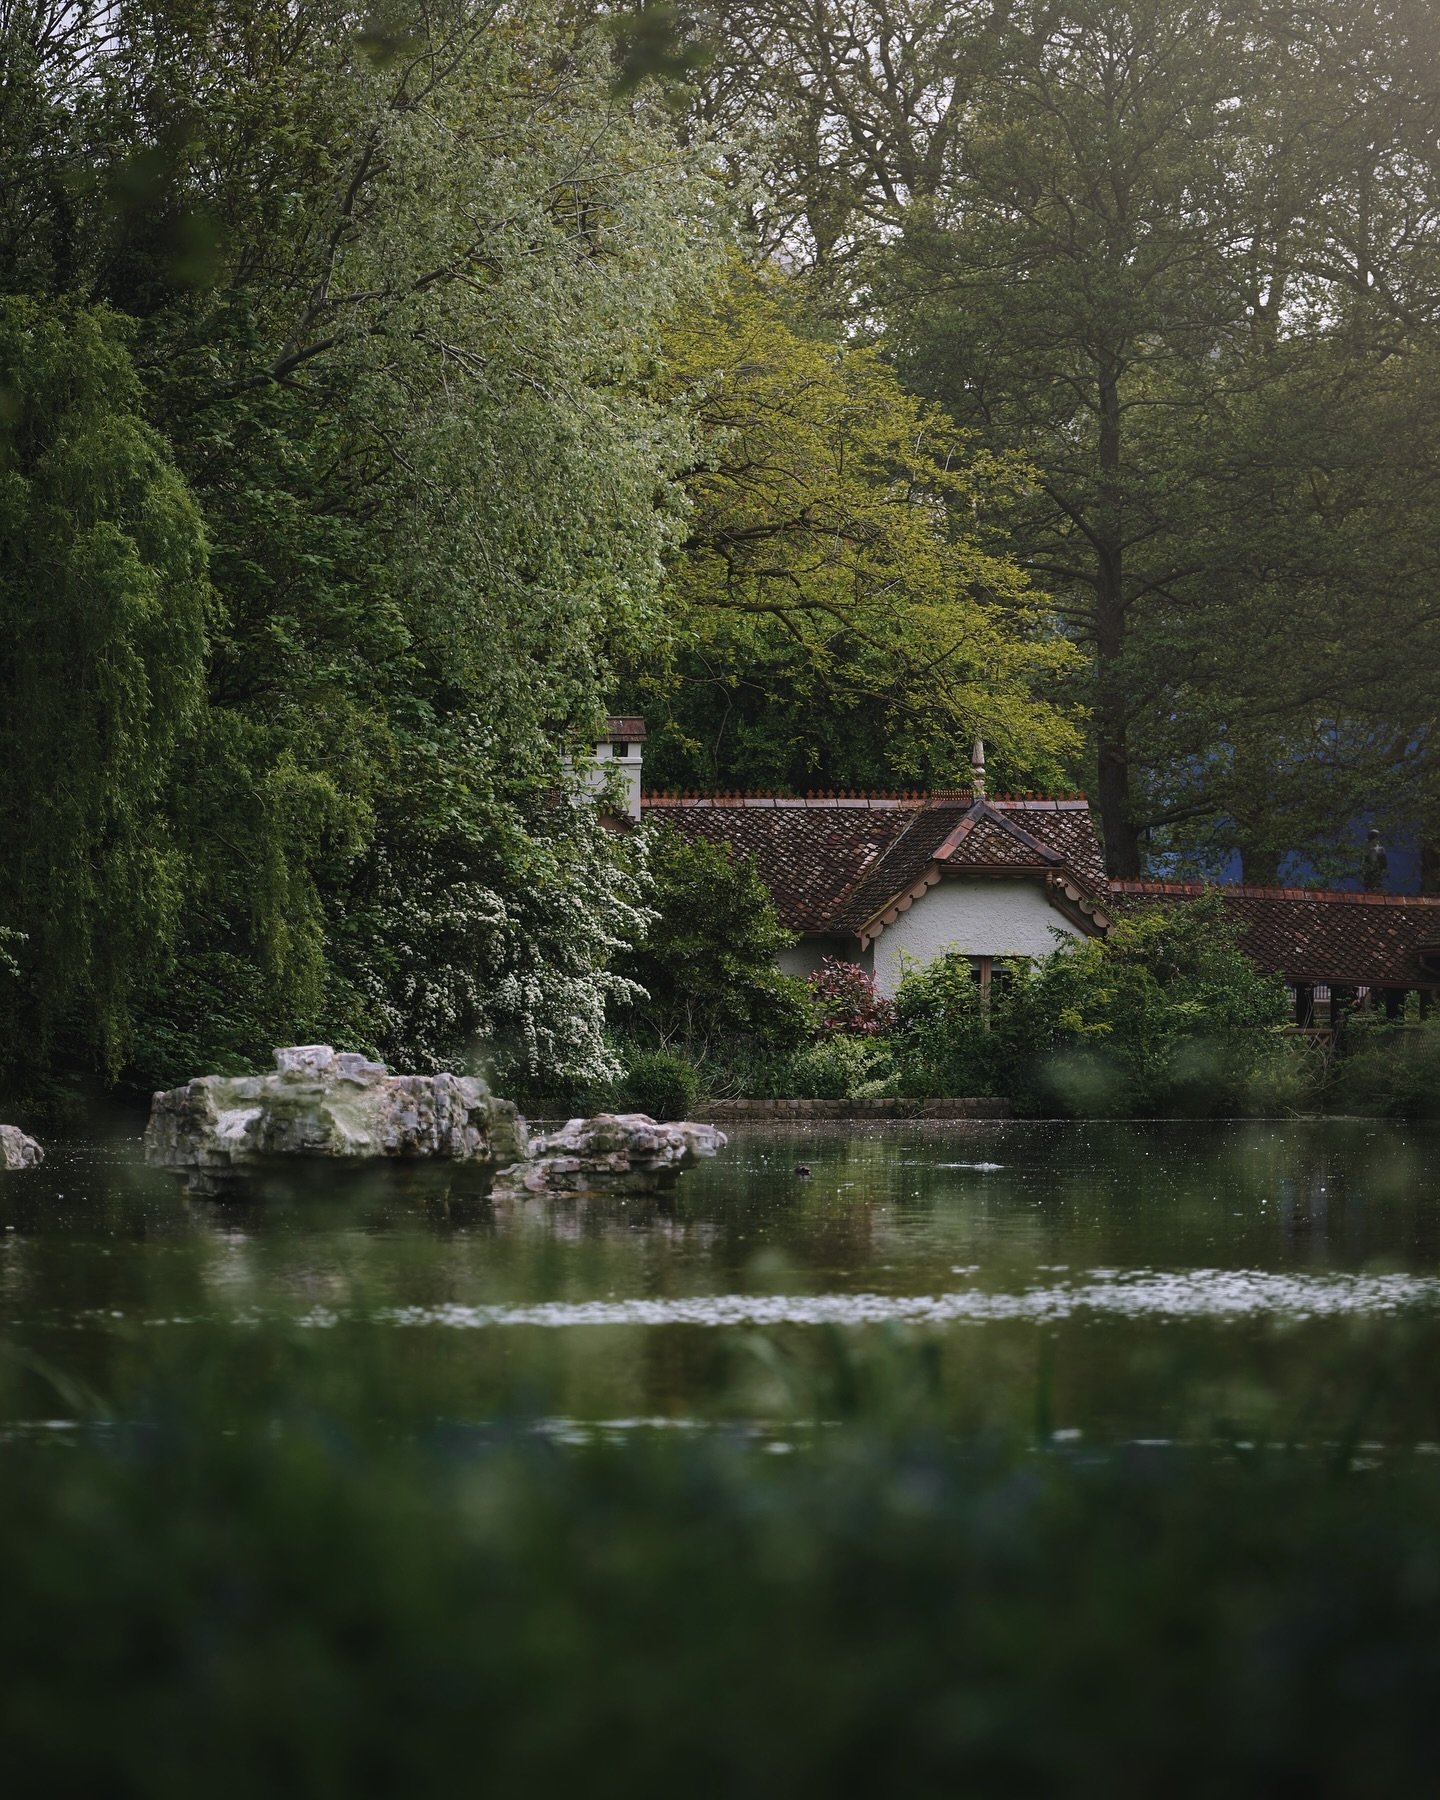 🦆 Duck Island Cottage, situated in St. James&rsquo;s Park in London, is a historic structure dating back to the 17th century. Throughout its history, it has had diverse functions such as housing park keepers and storage. Presently, it serves as a hu